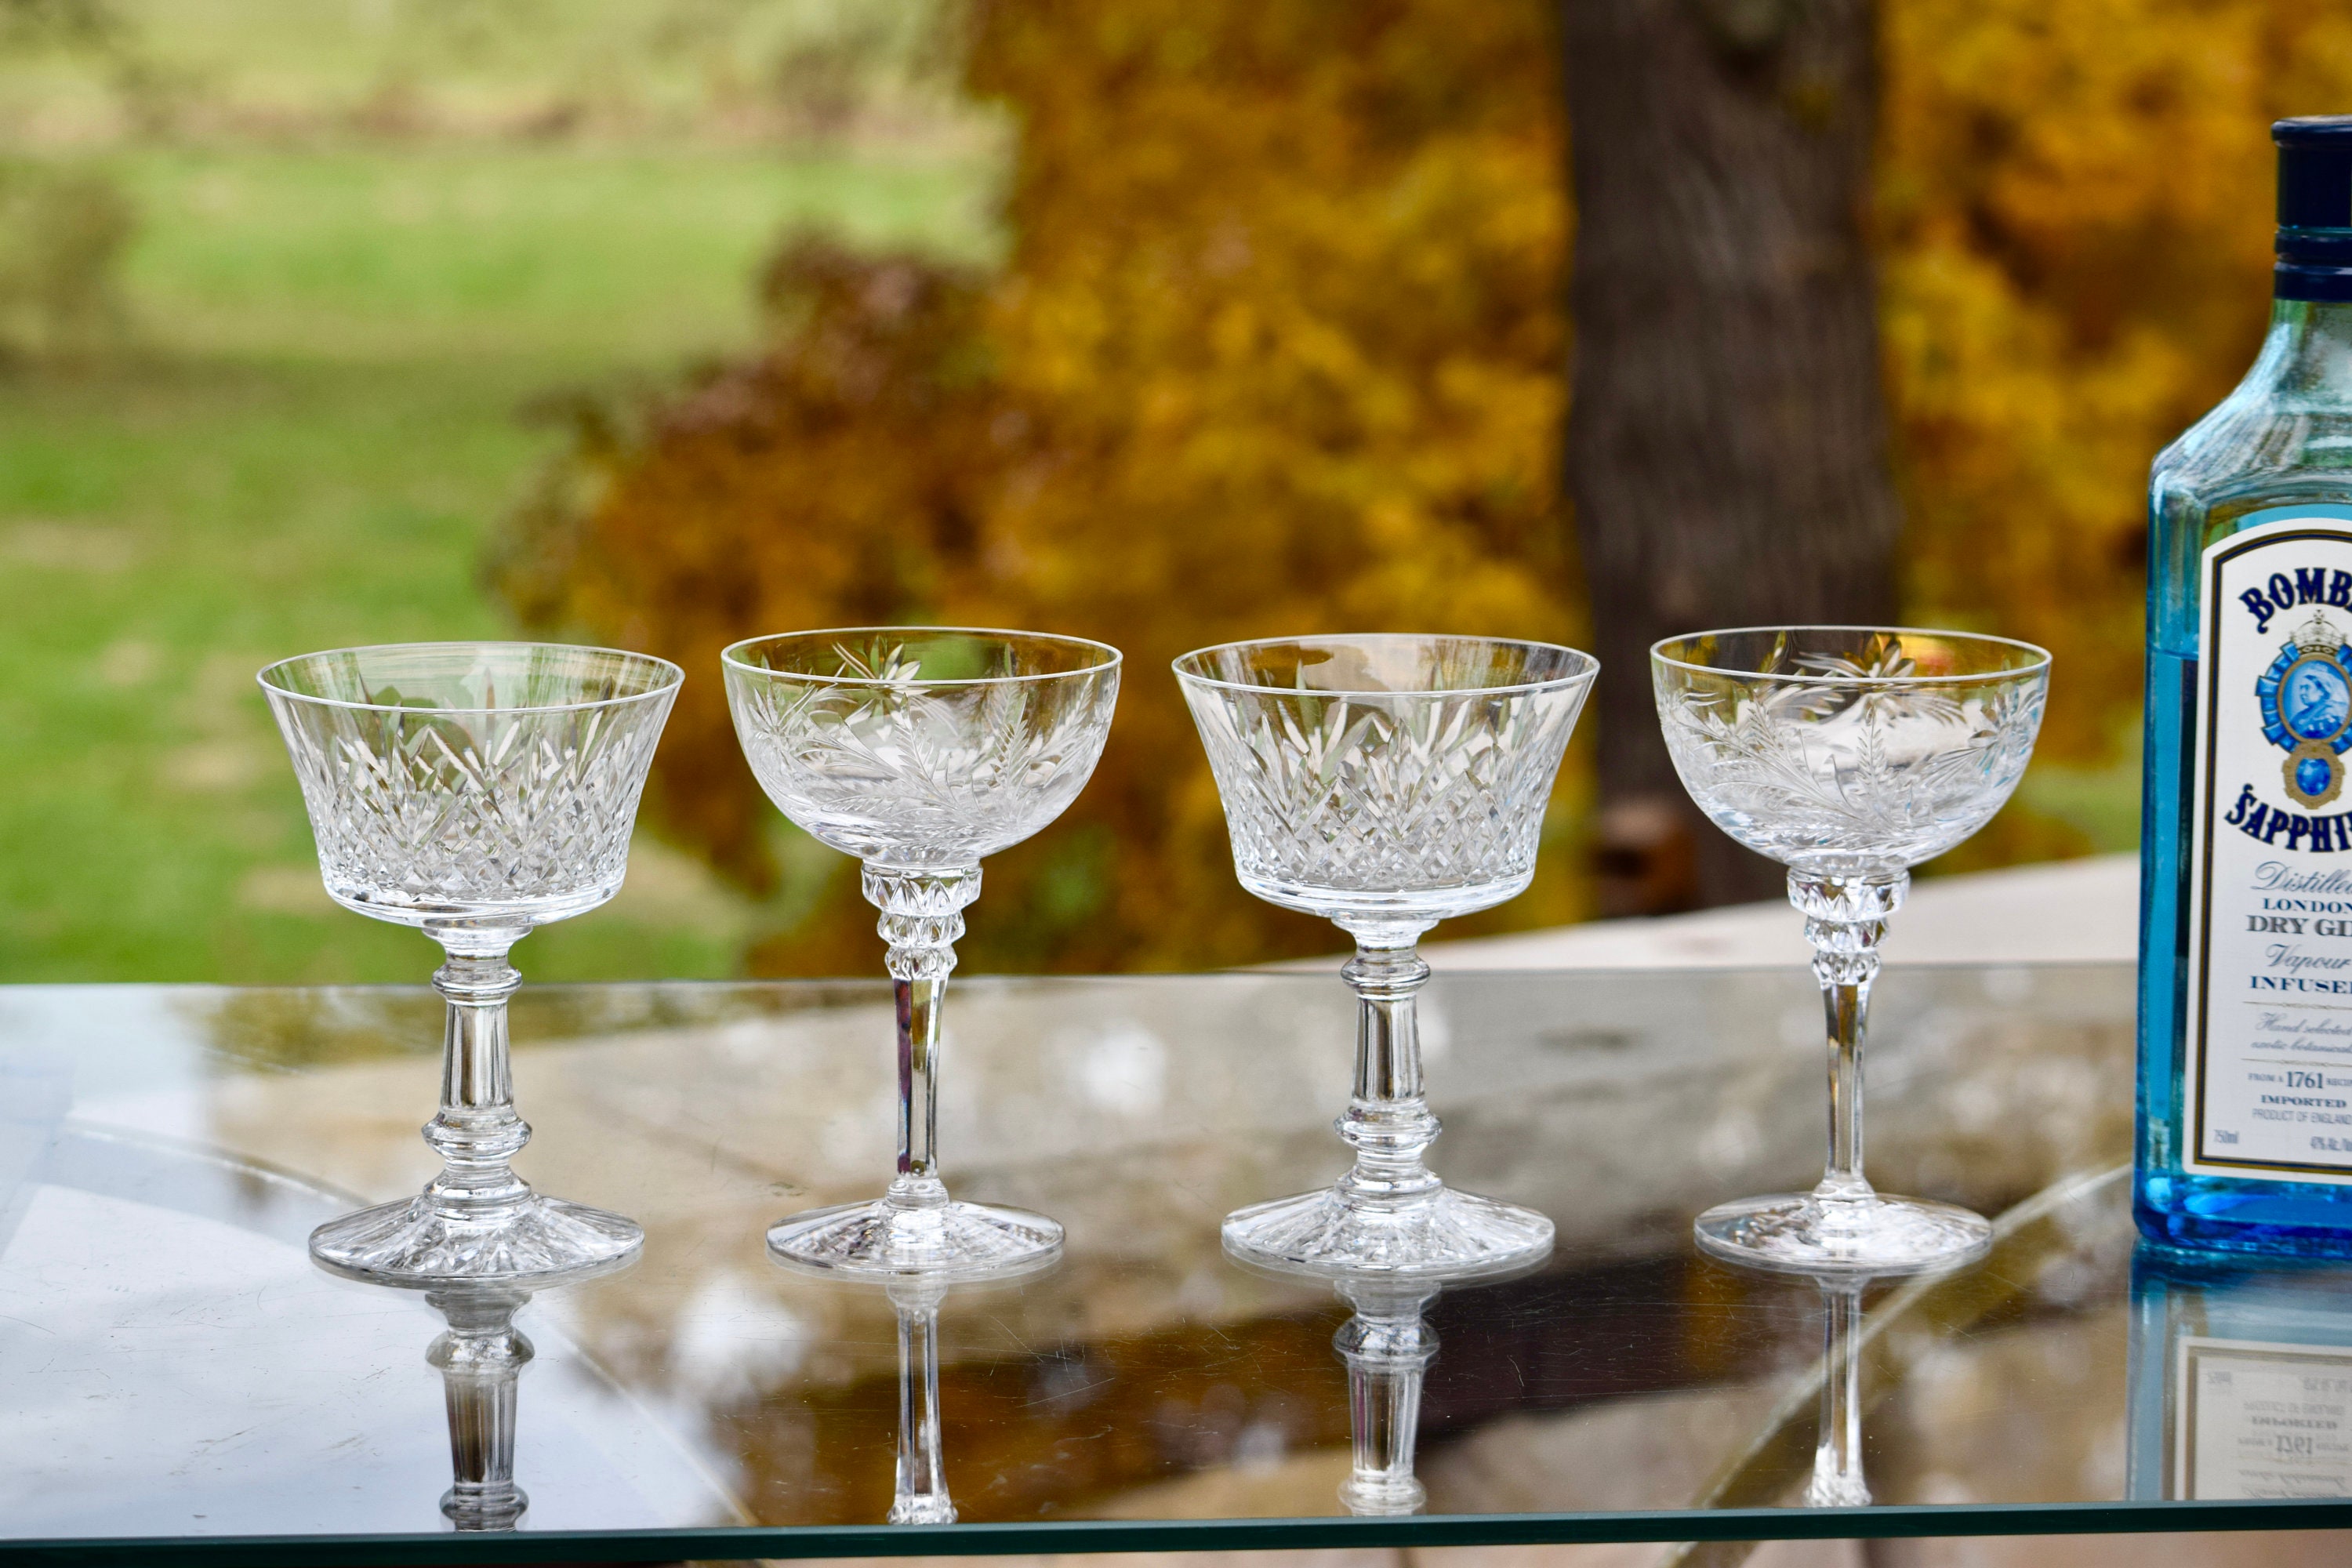 4 Vintage Gold Cocktail Martini Glasses, Set of 4 Mis-Matched Cocktail  glasses, Wedding Toasting Champagne Glasses ~ Coupes, 1940's-1950's